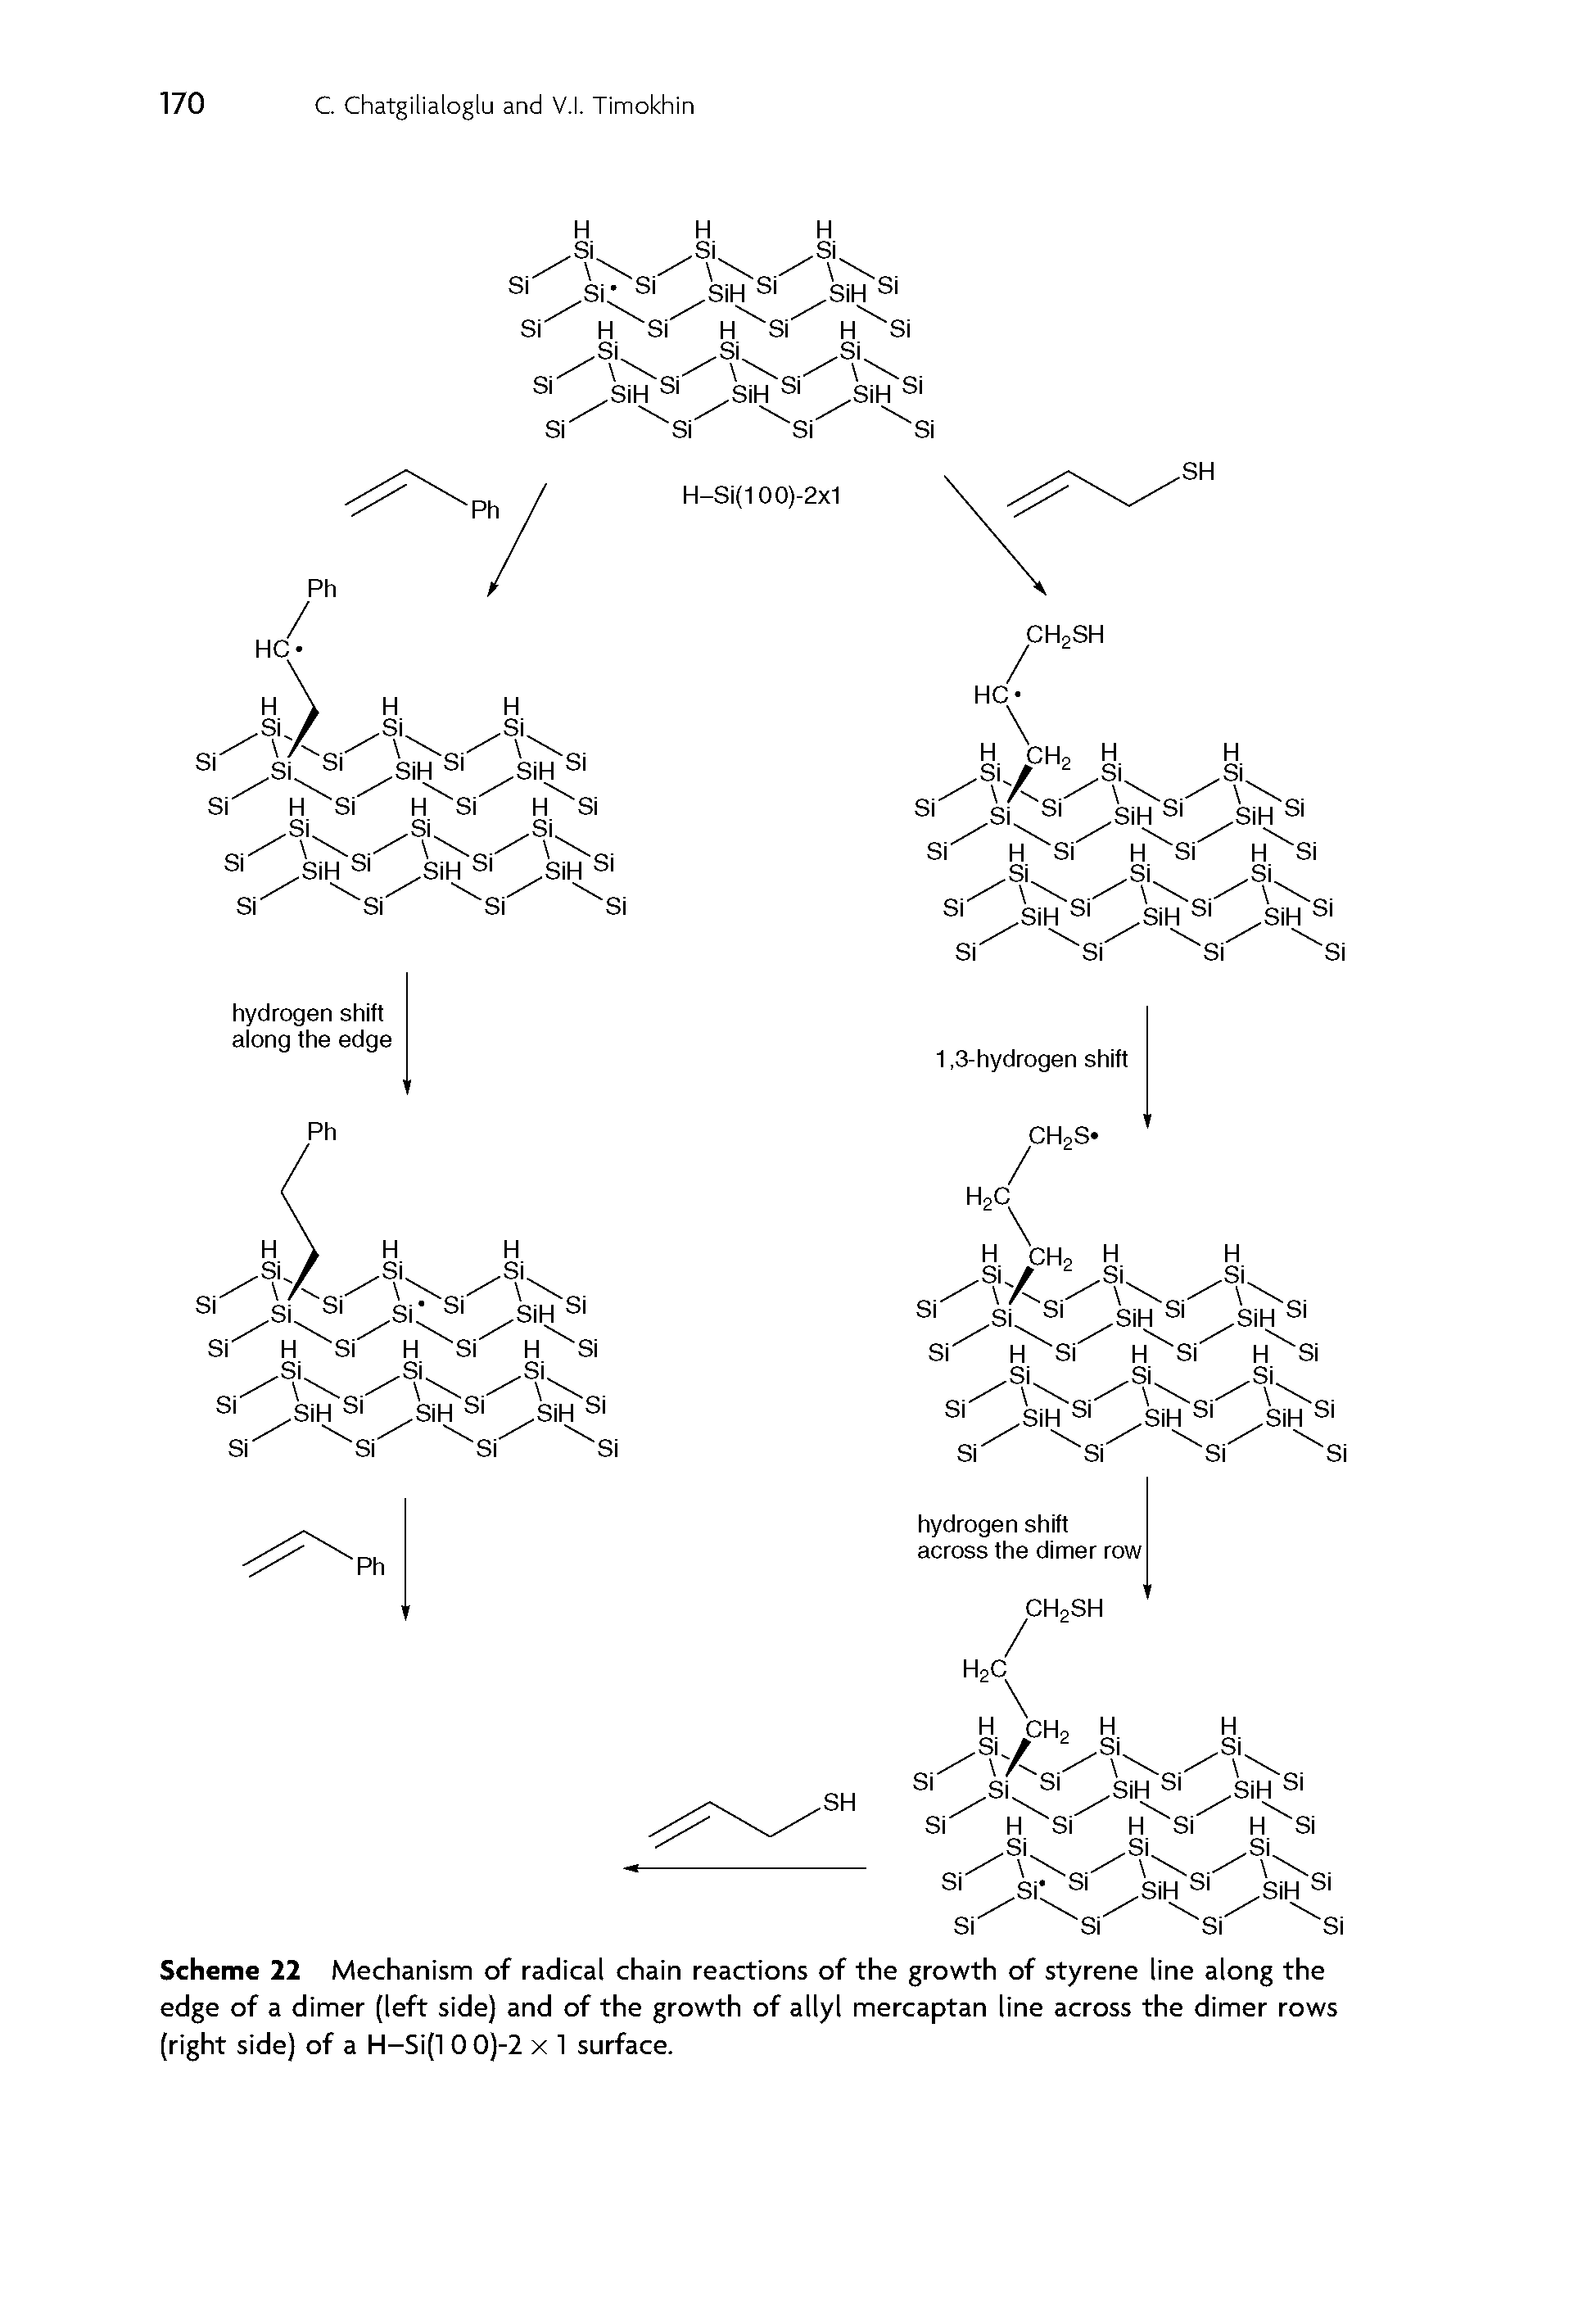 Scheme 22 Mechanism of radical chain reactions of the growth of styrene line along the edge of a dimer (left side) and of the growth of allyl mercaptan line across the dimer rows (right side) of a H-Si(l 0 0)-2 x 1 surface.